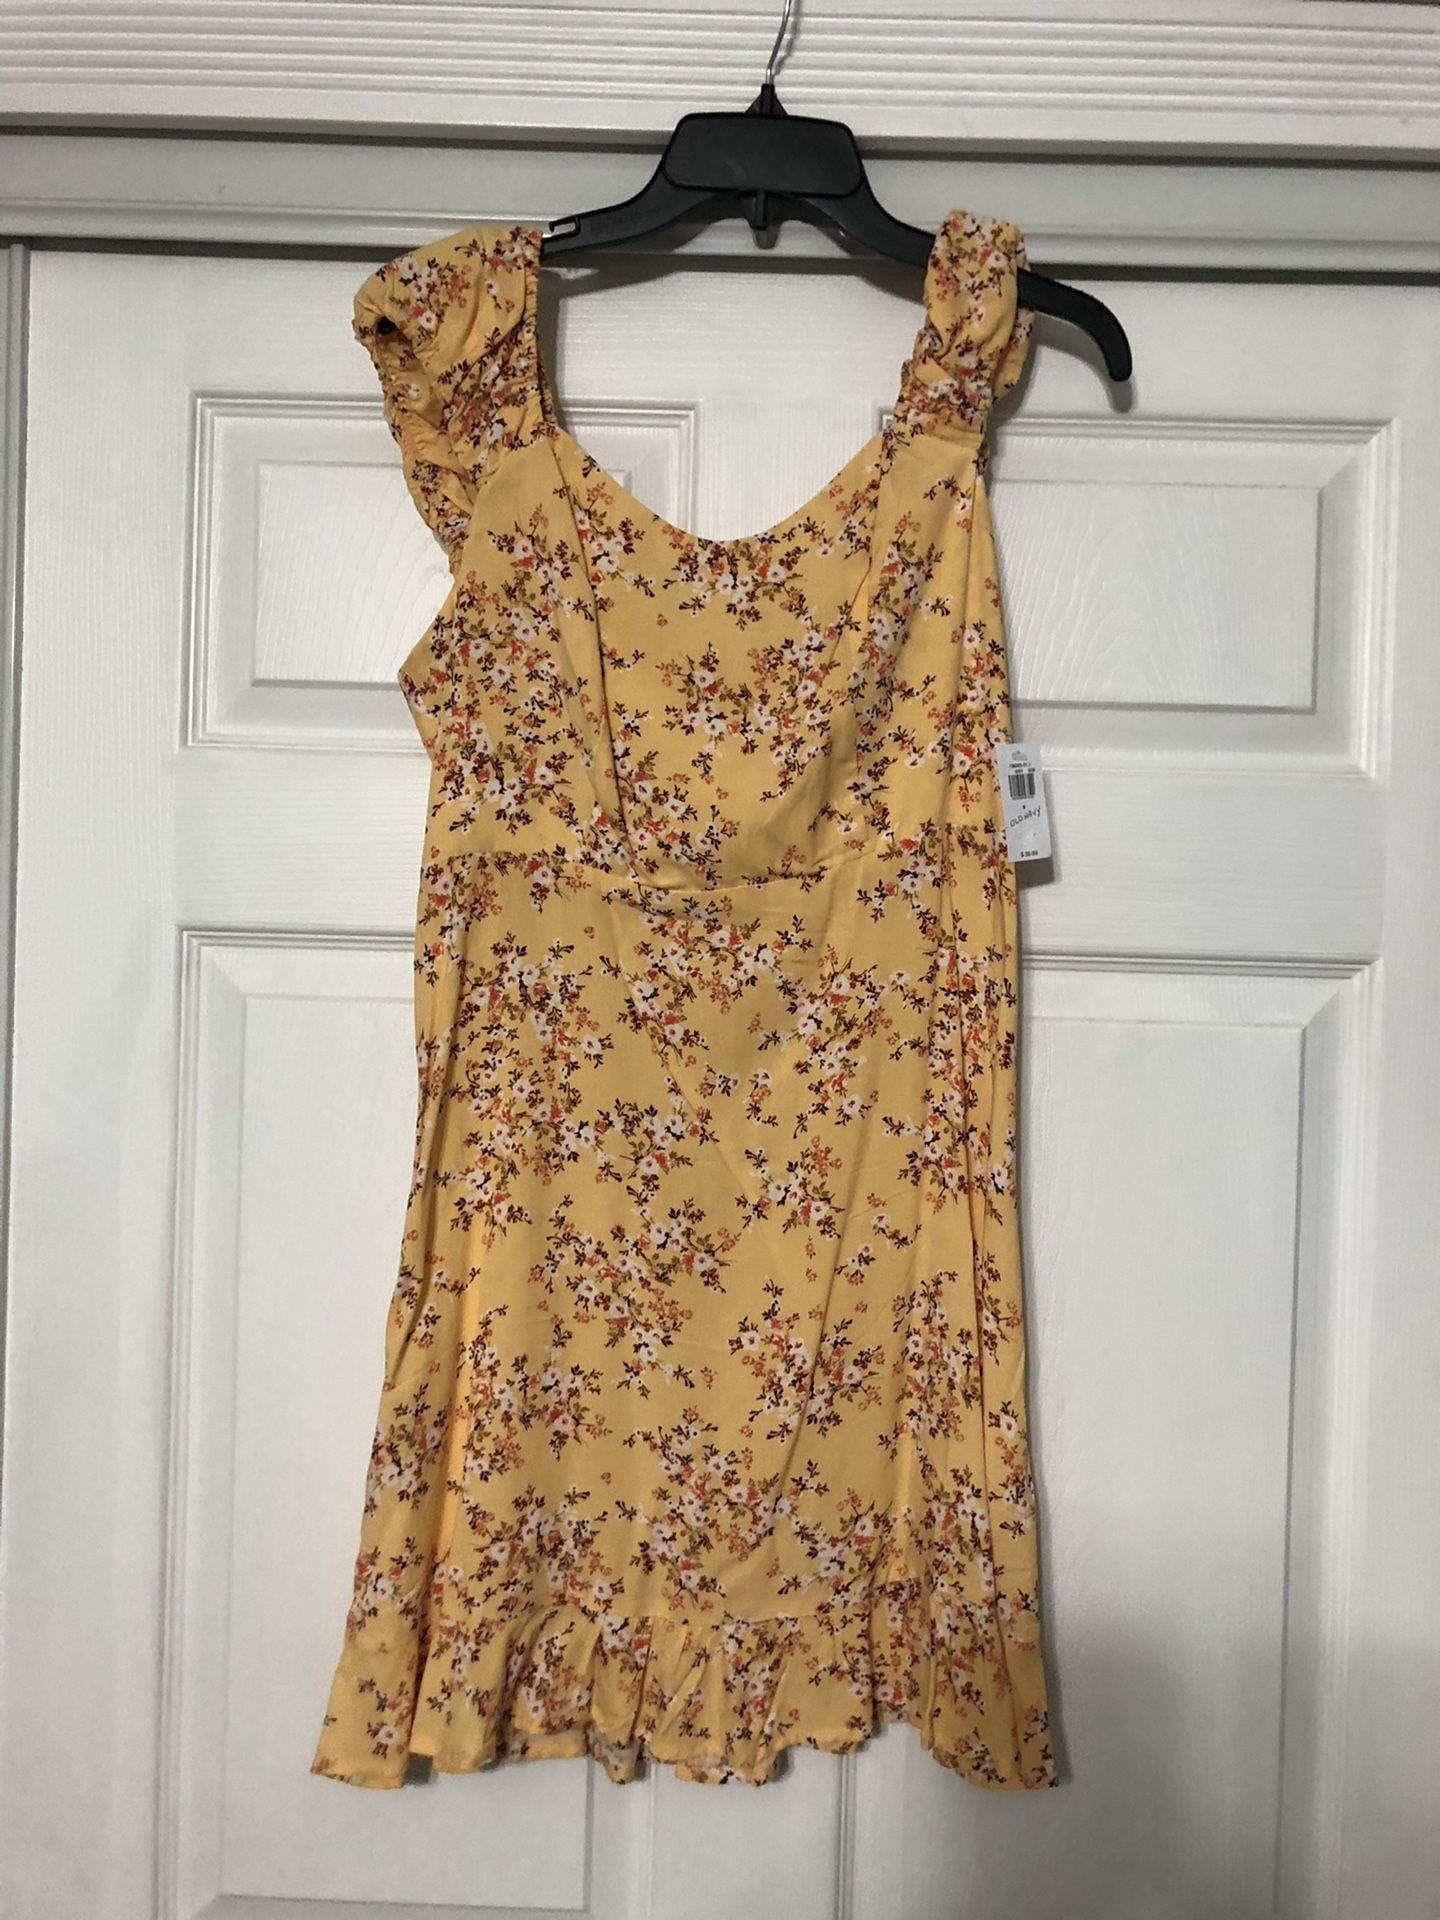 New With Tags Old Navy Sundress 